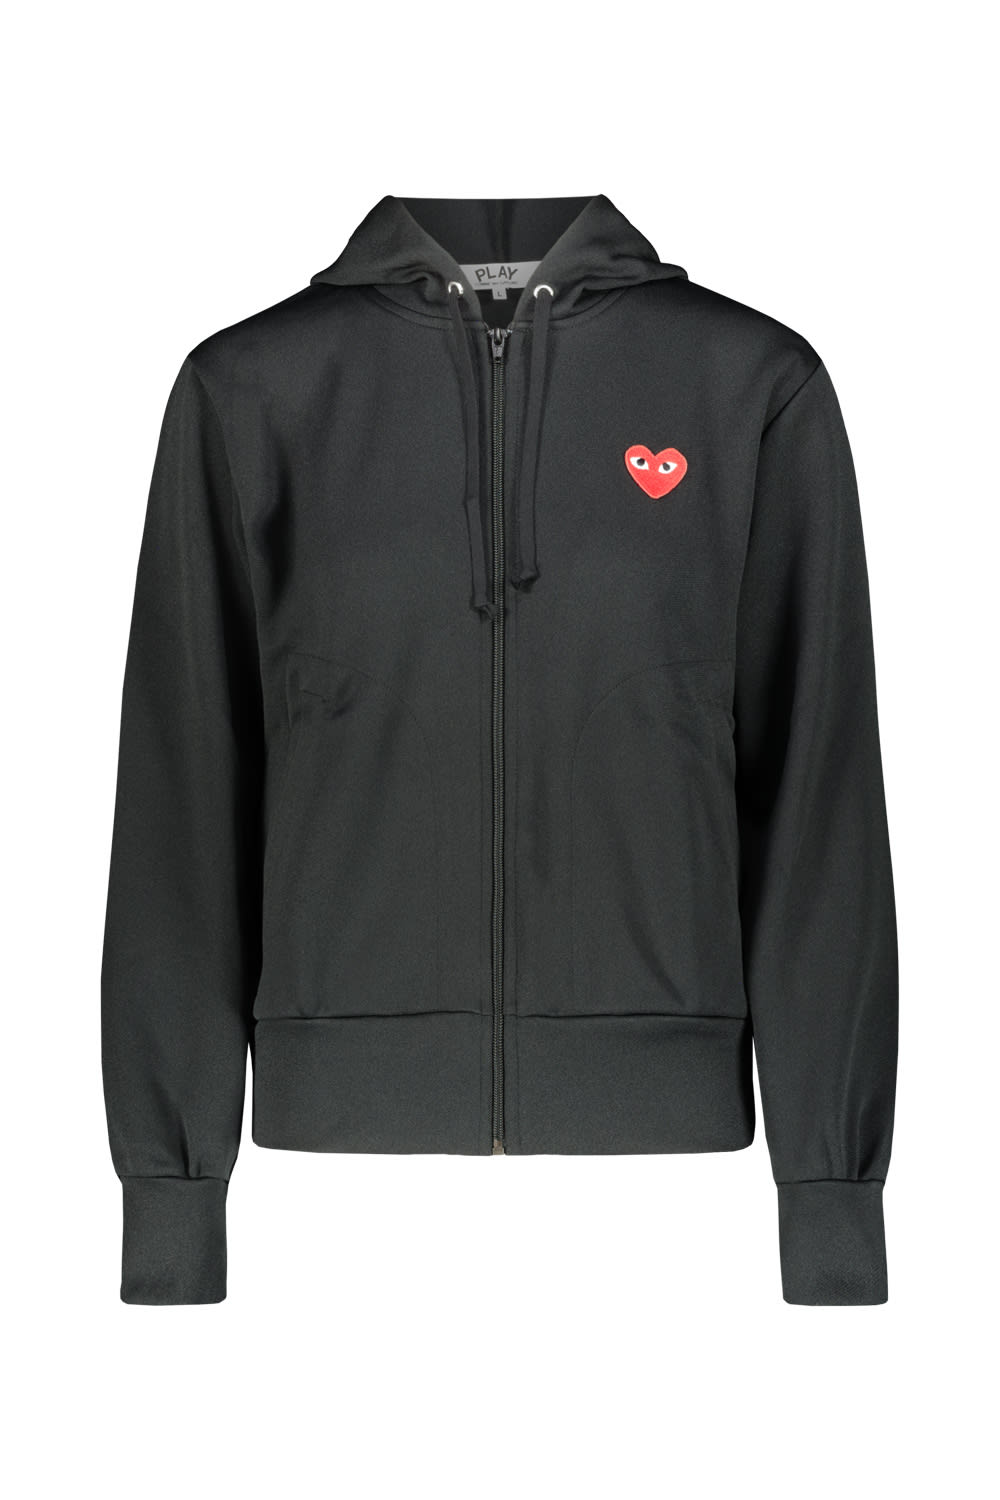 Comme des Garçons Play Black Zipped Hoodie With Red Heart